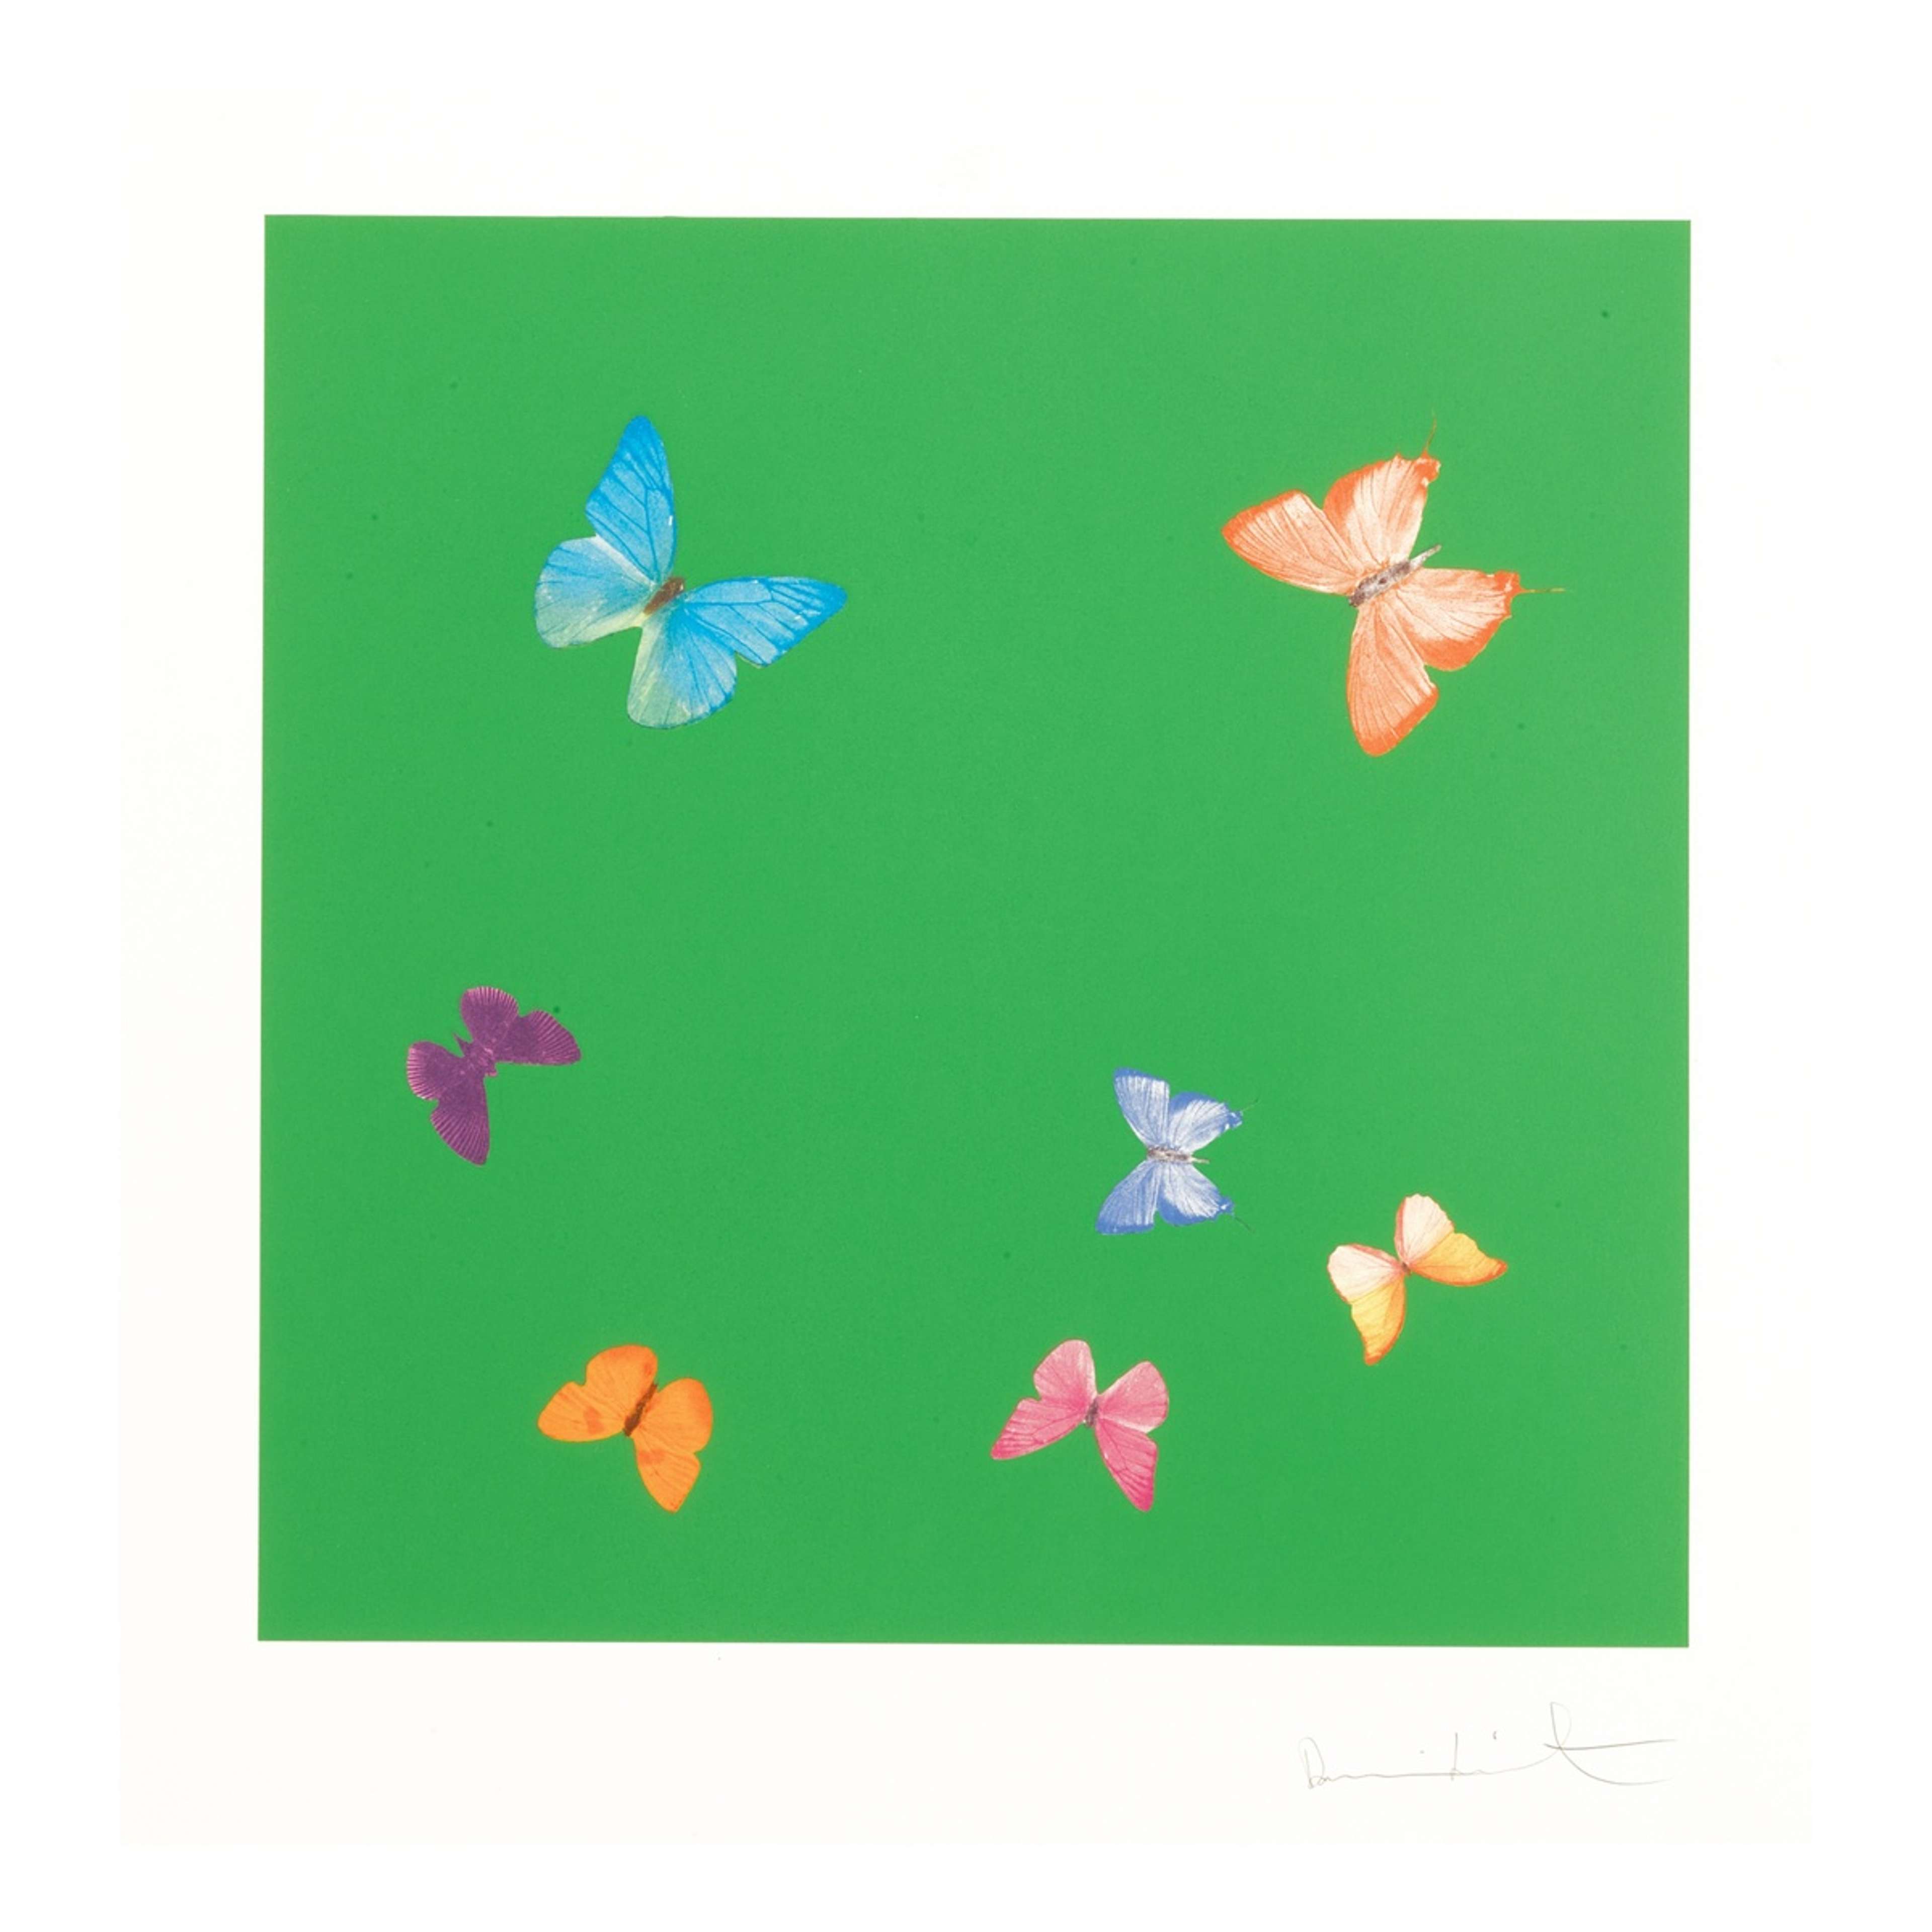 Longing by Damien Hirst